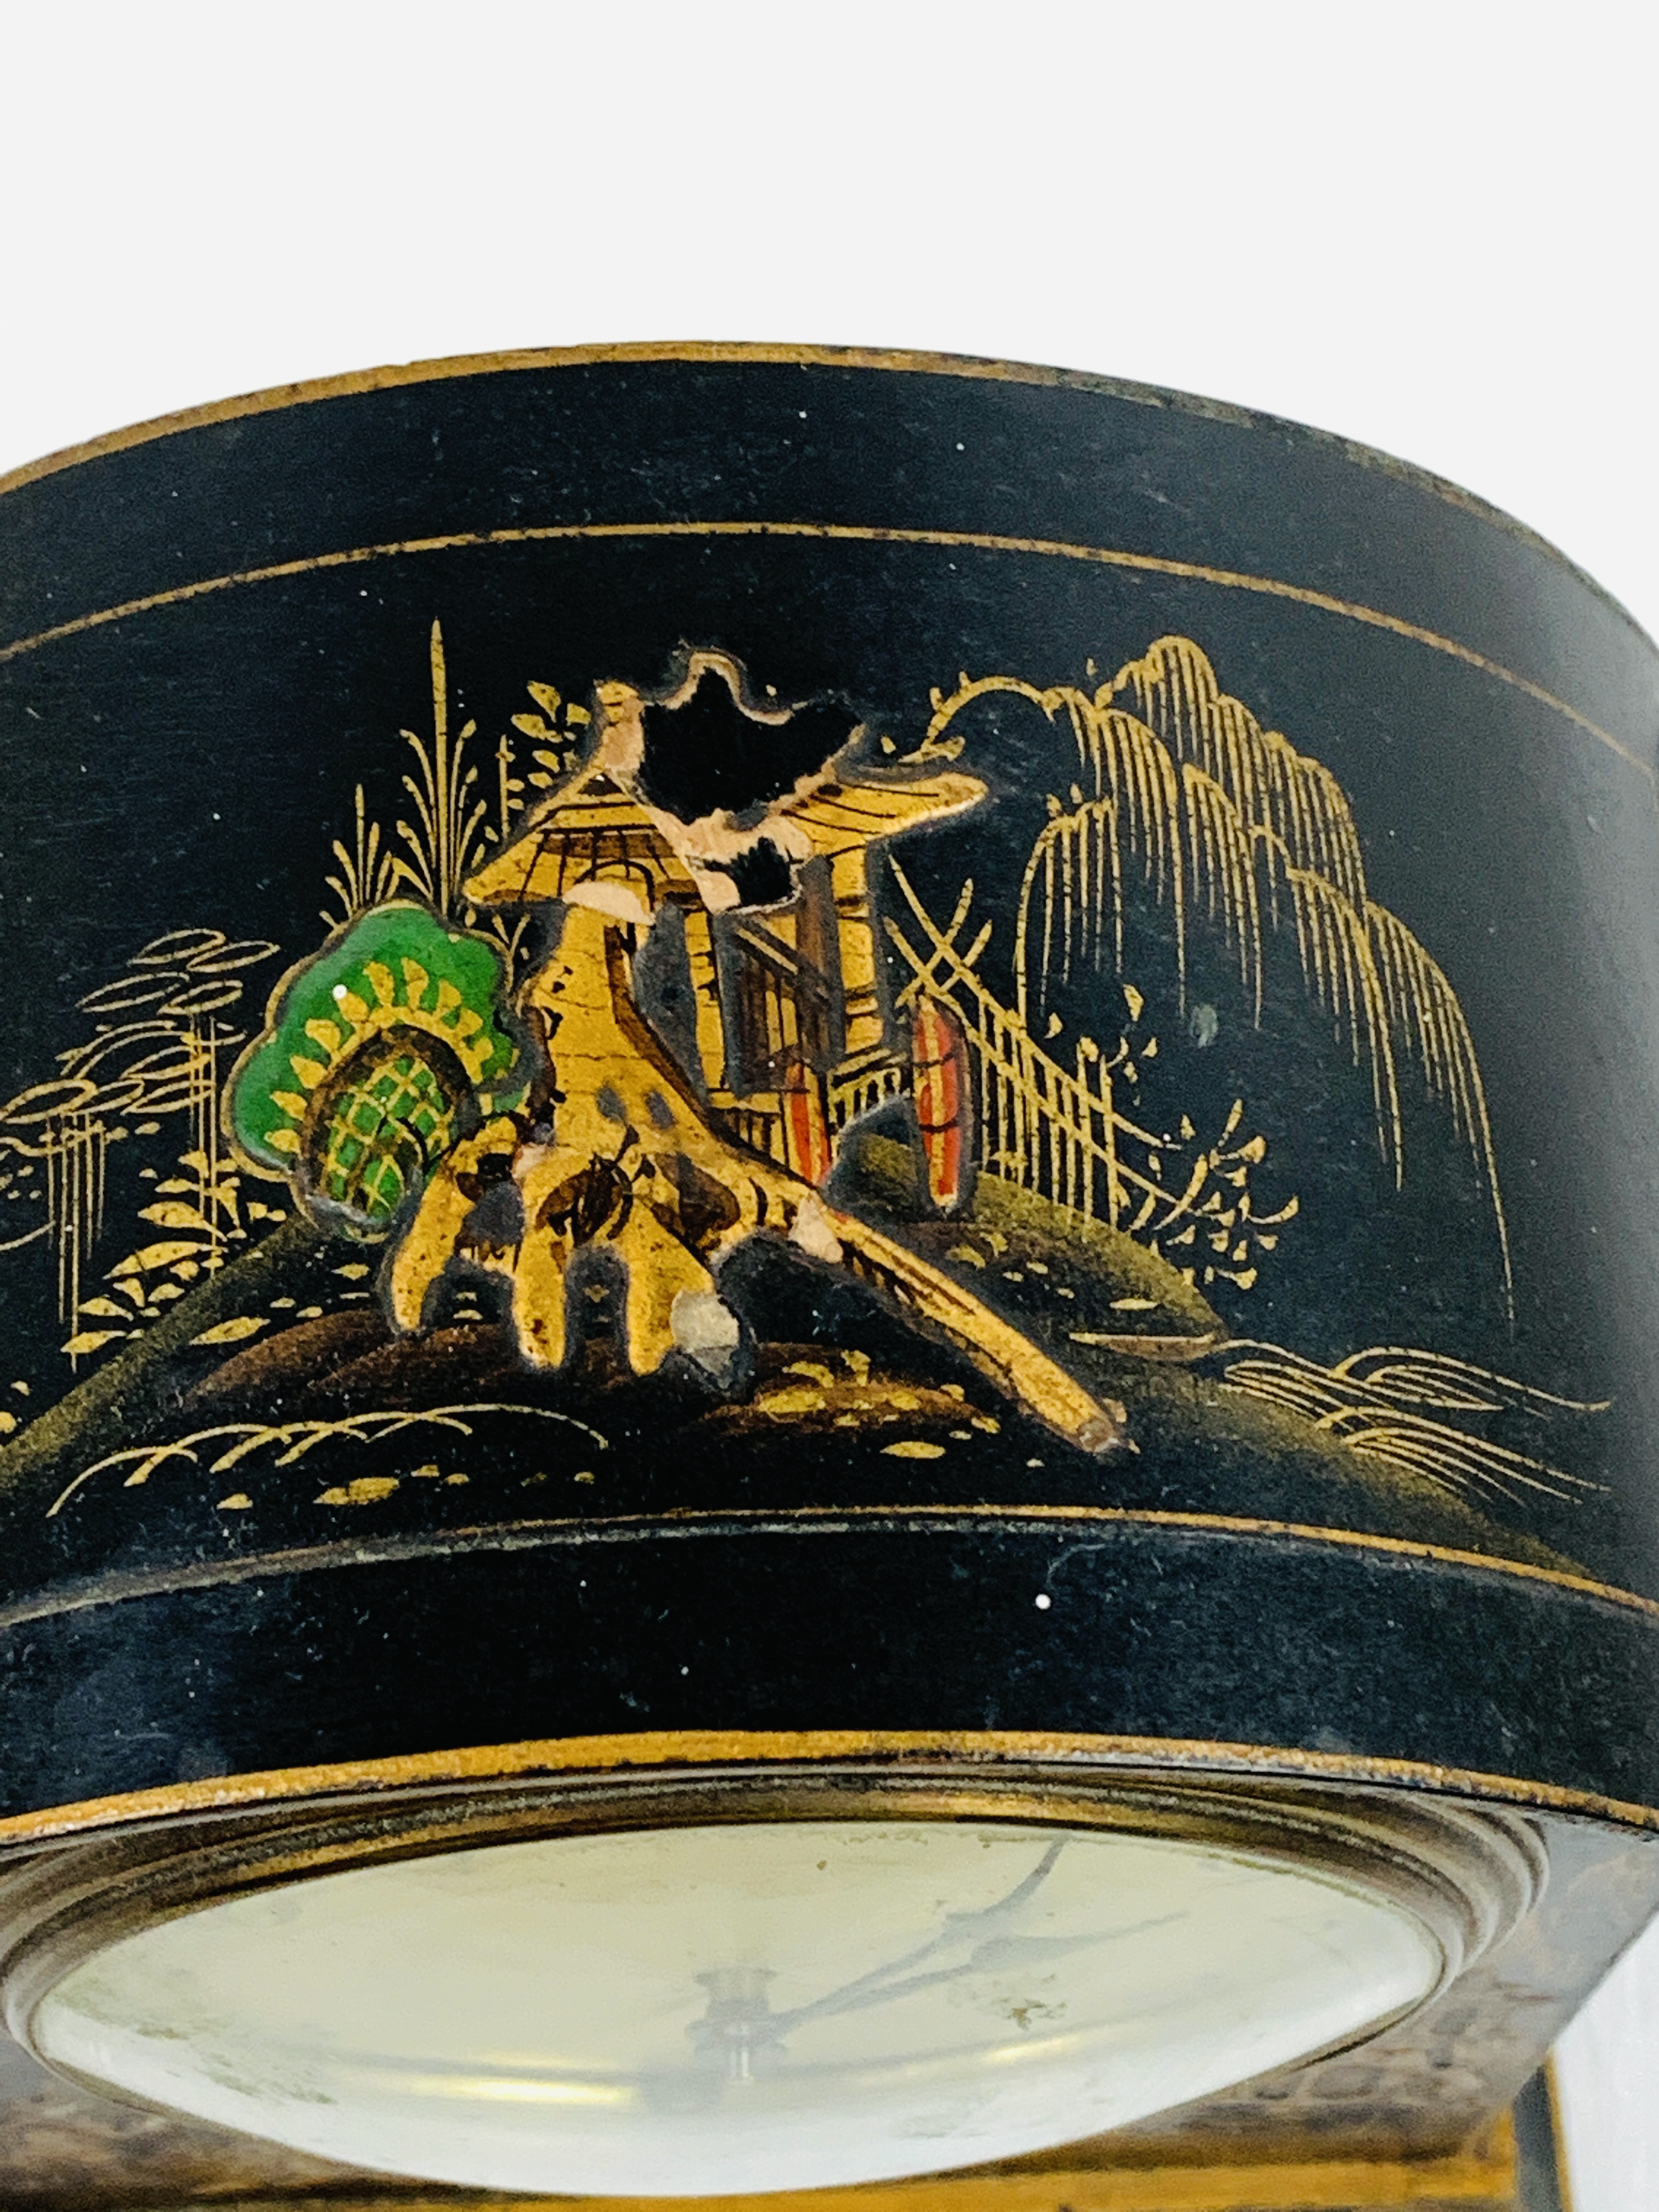 Chinoiserie mantel clock - Image 4 of 4